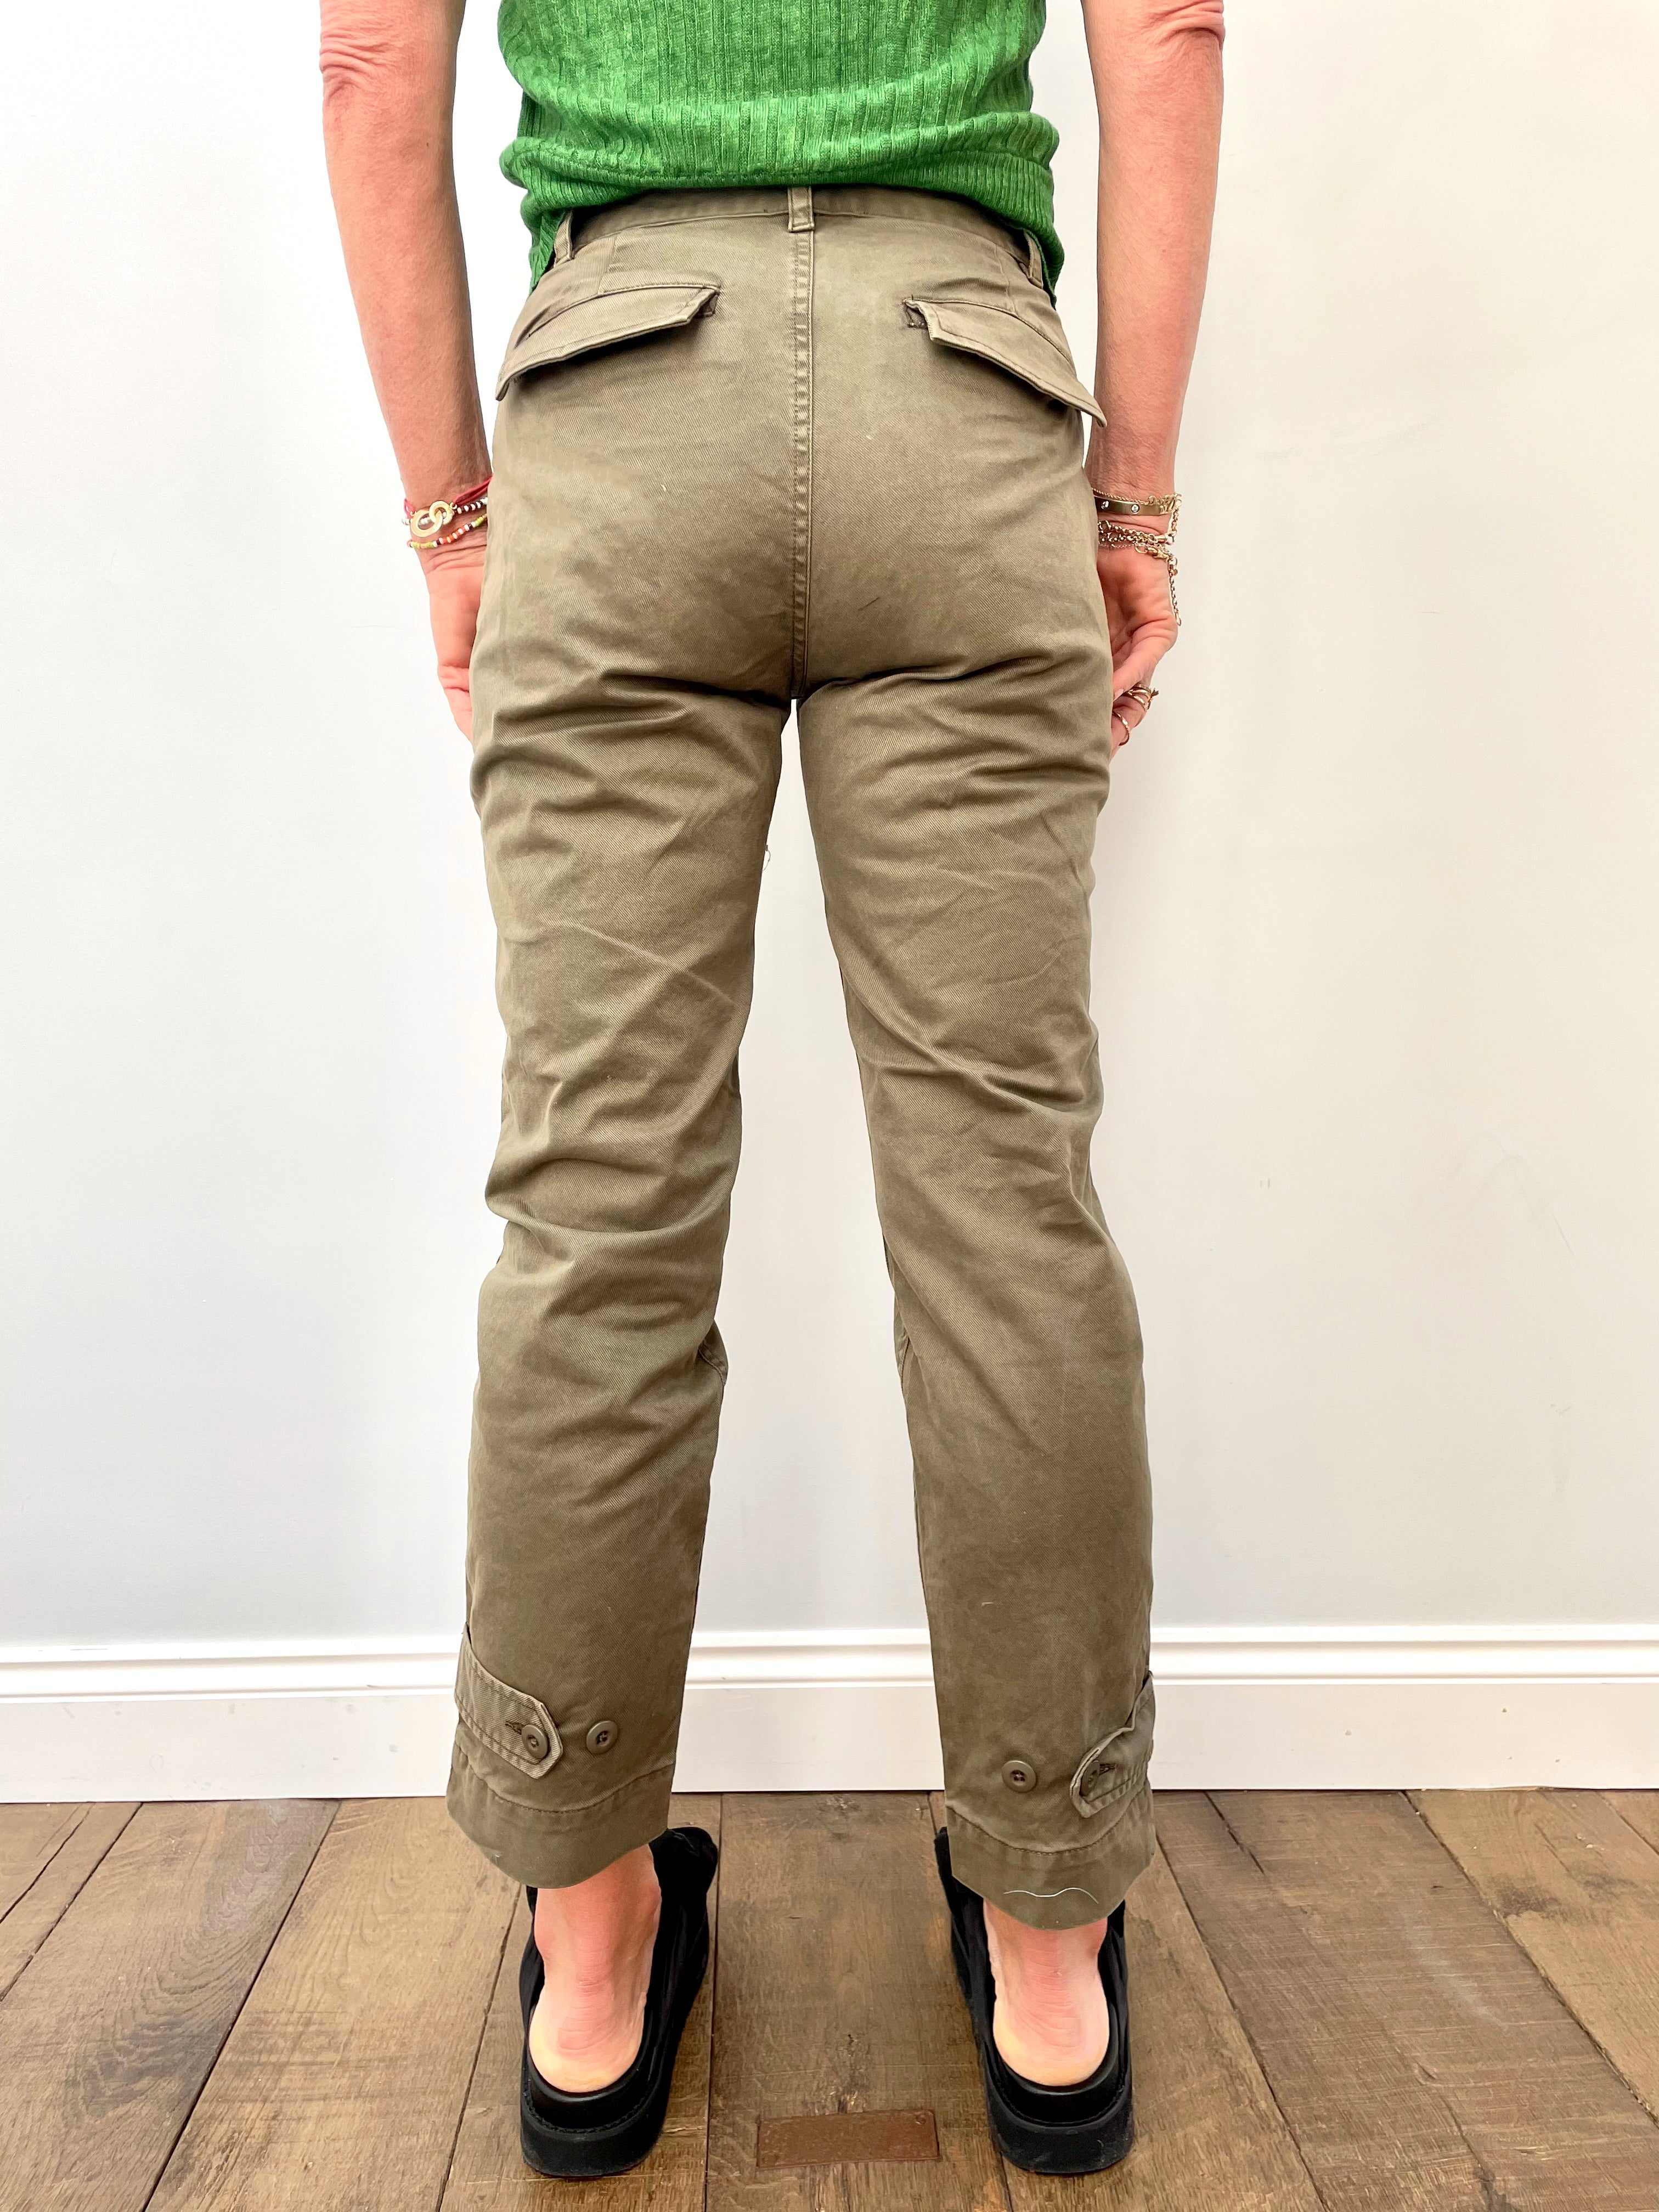 RAILS Adler Trousers in Military